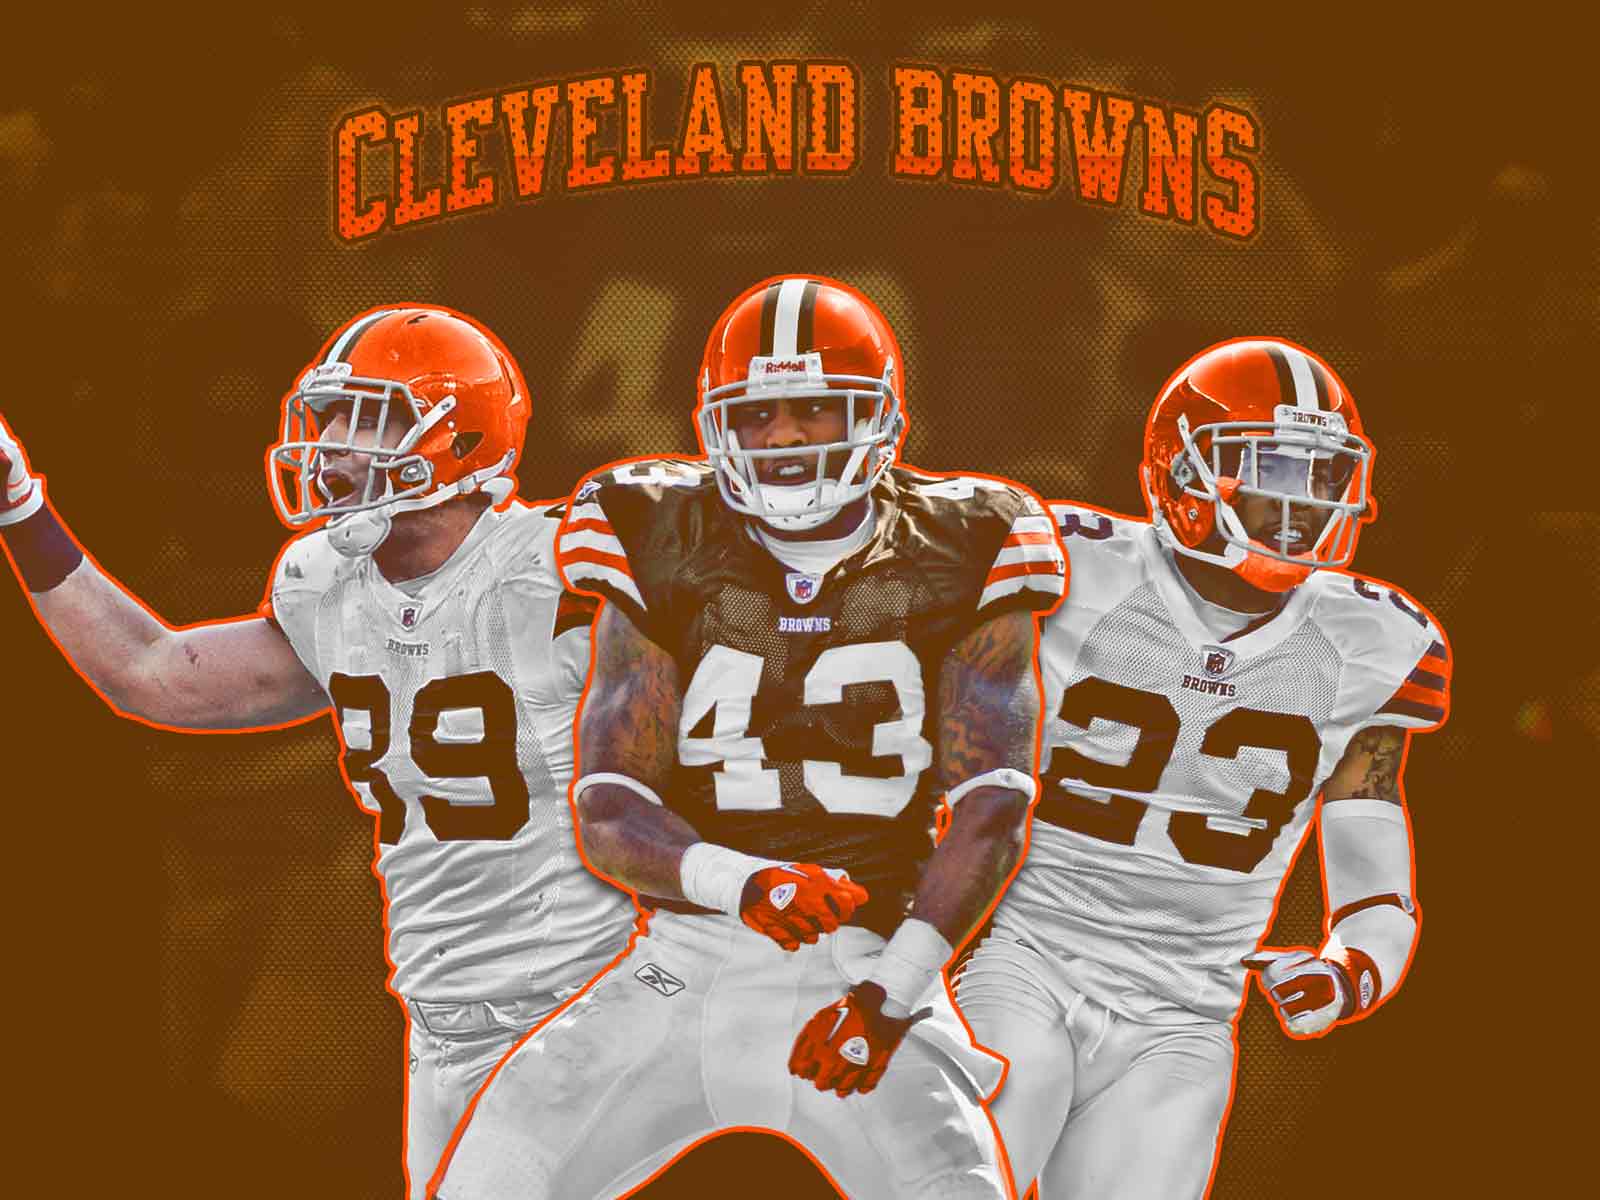  Wallpapers   Cleveland Browns wallpaper 1600x1200